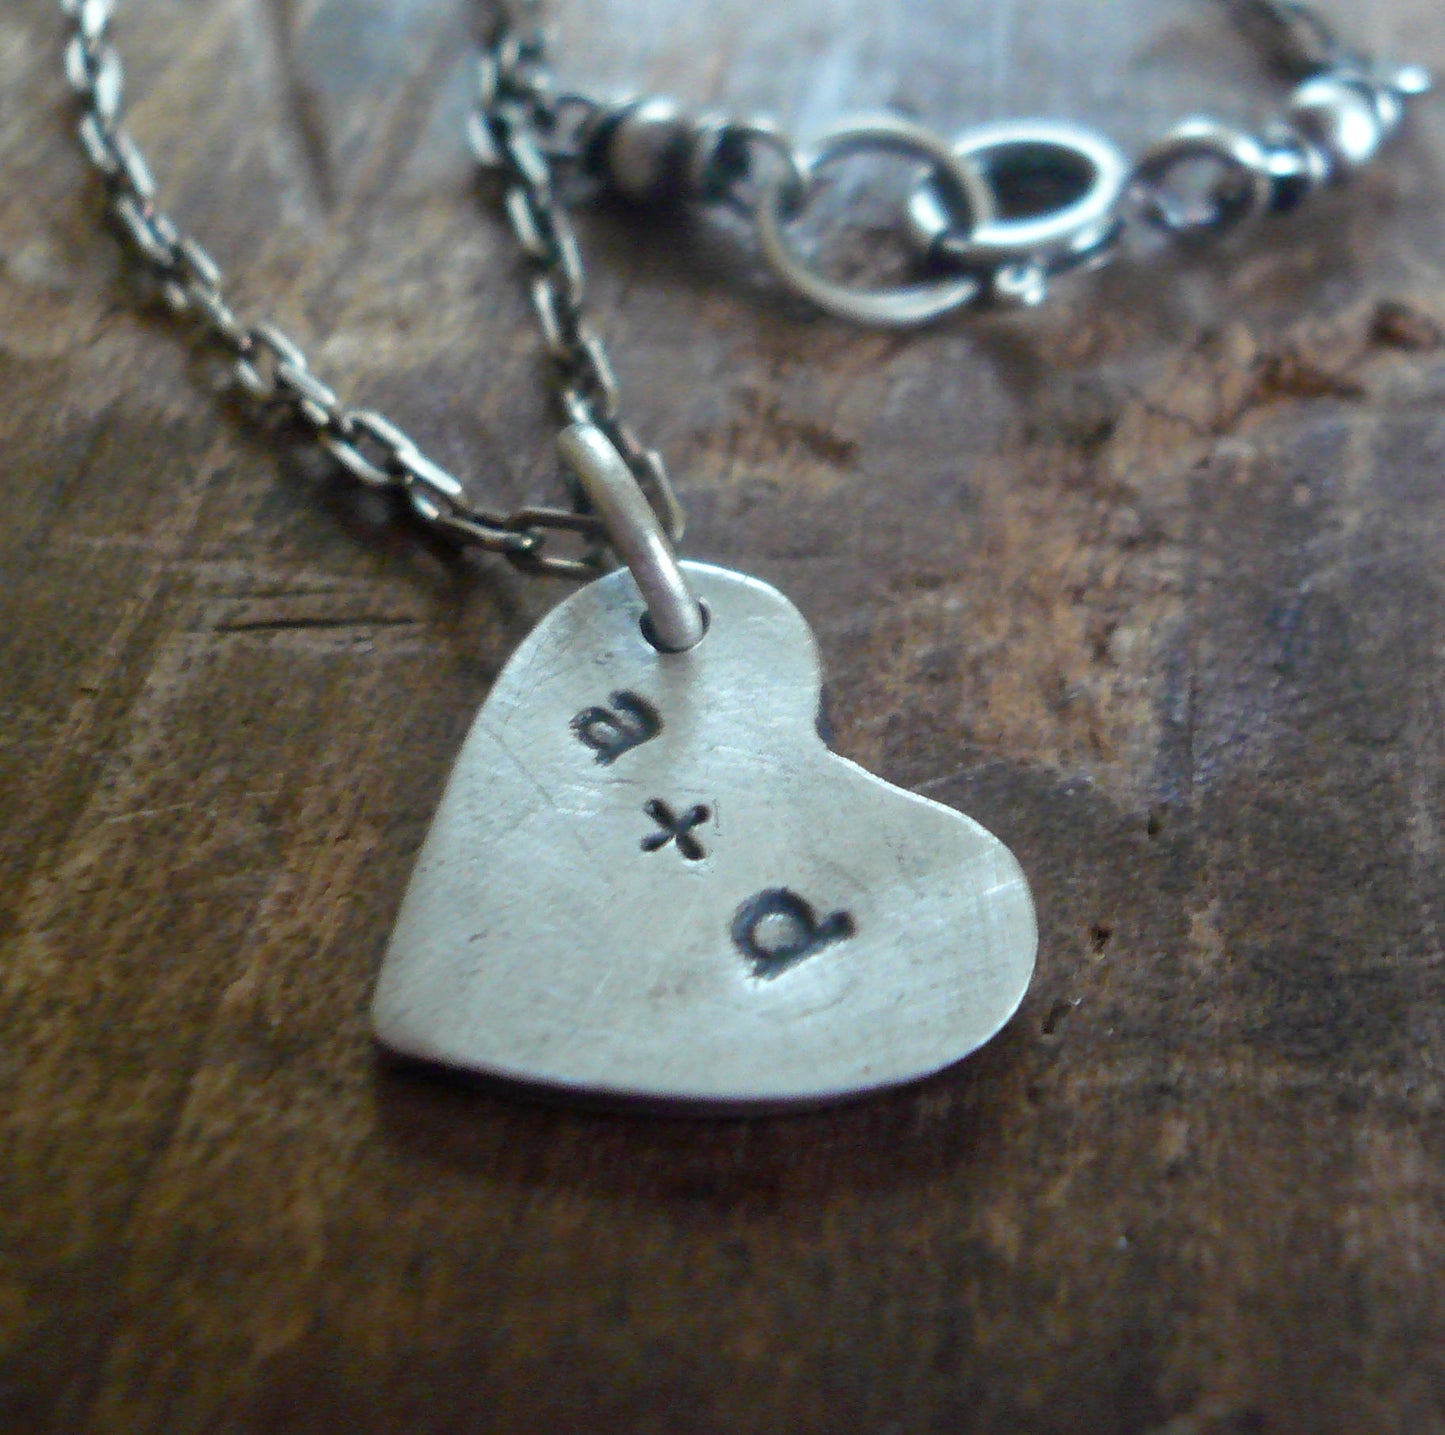 Sweethearts Necklace - Handmade. Oxidized Fine and Sterling Silver Personalized Heart Charm Necklace